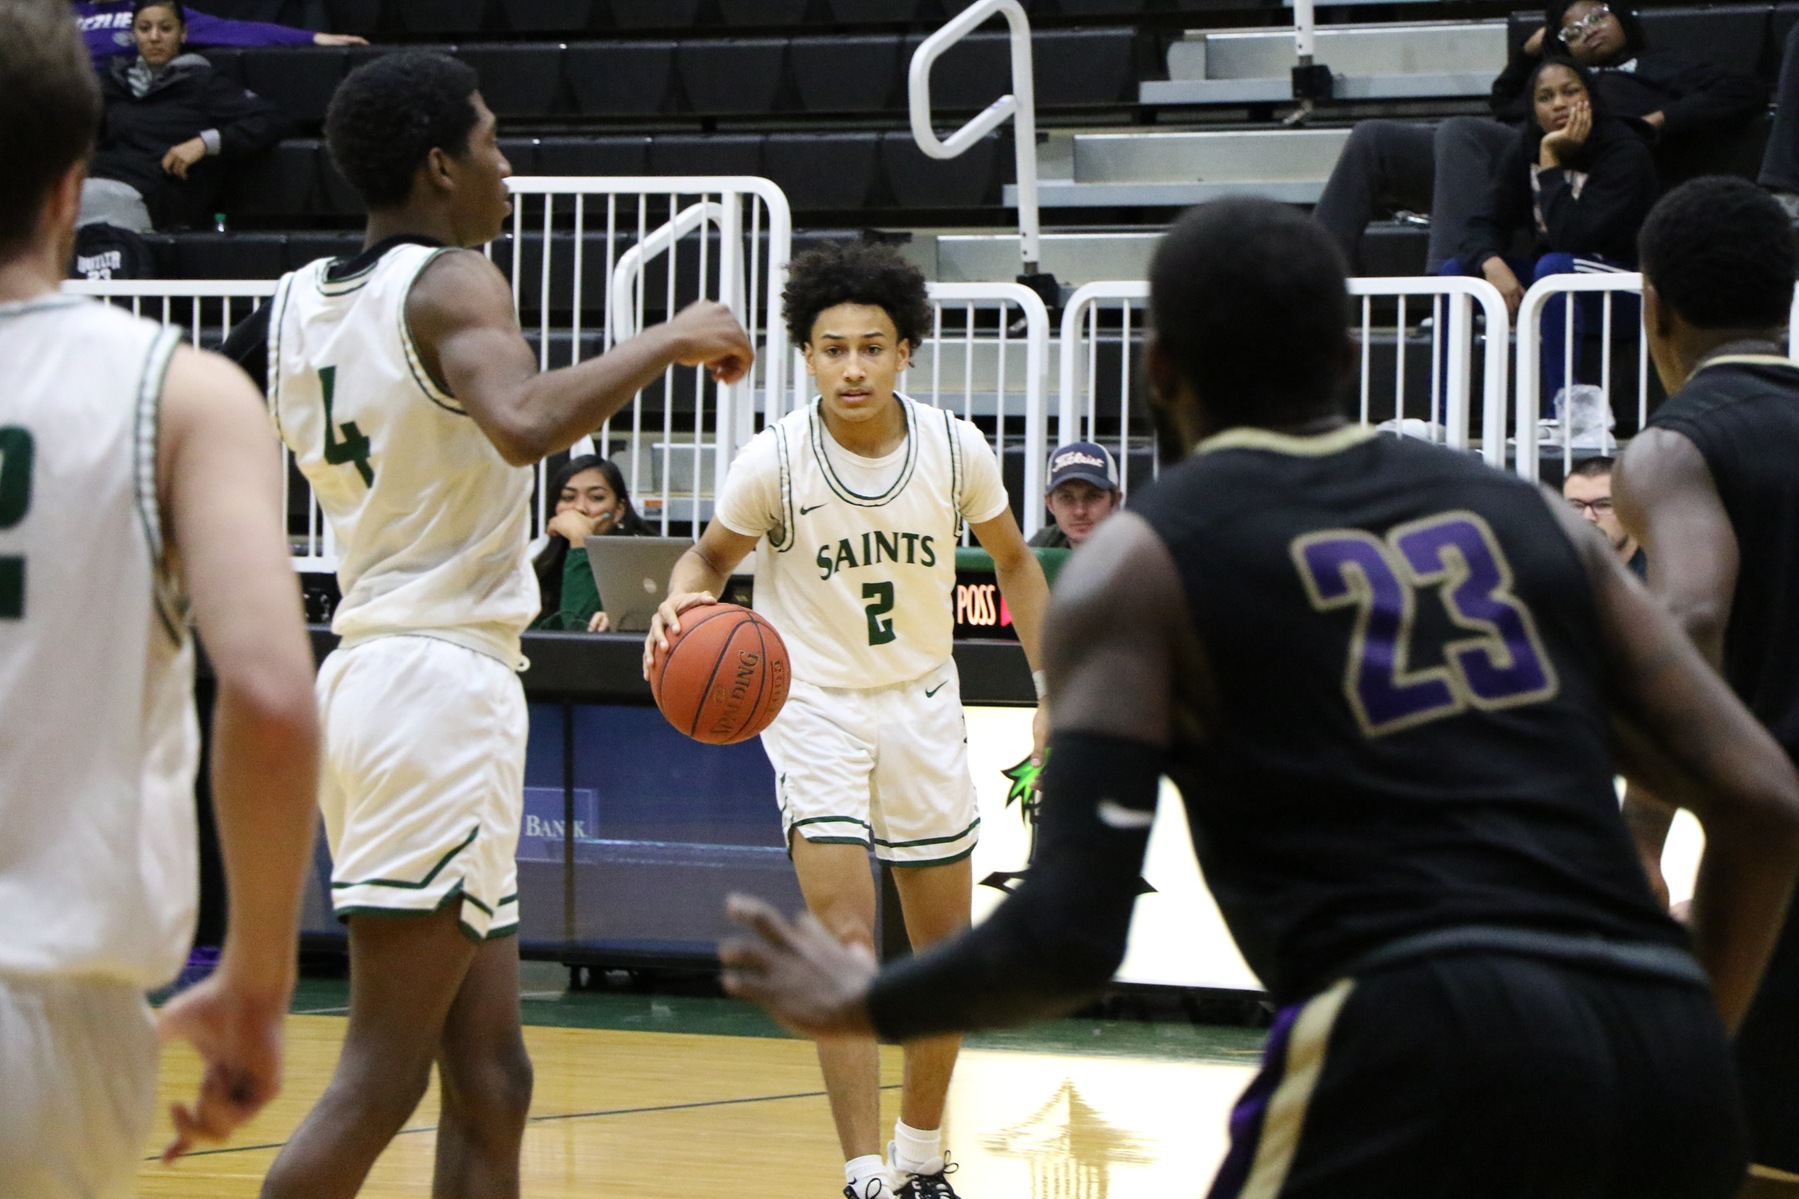 Saints fall in Conference opener against Butler